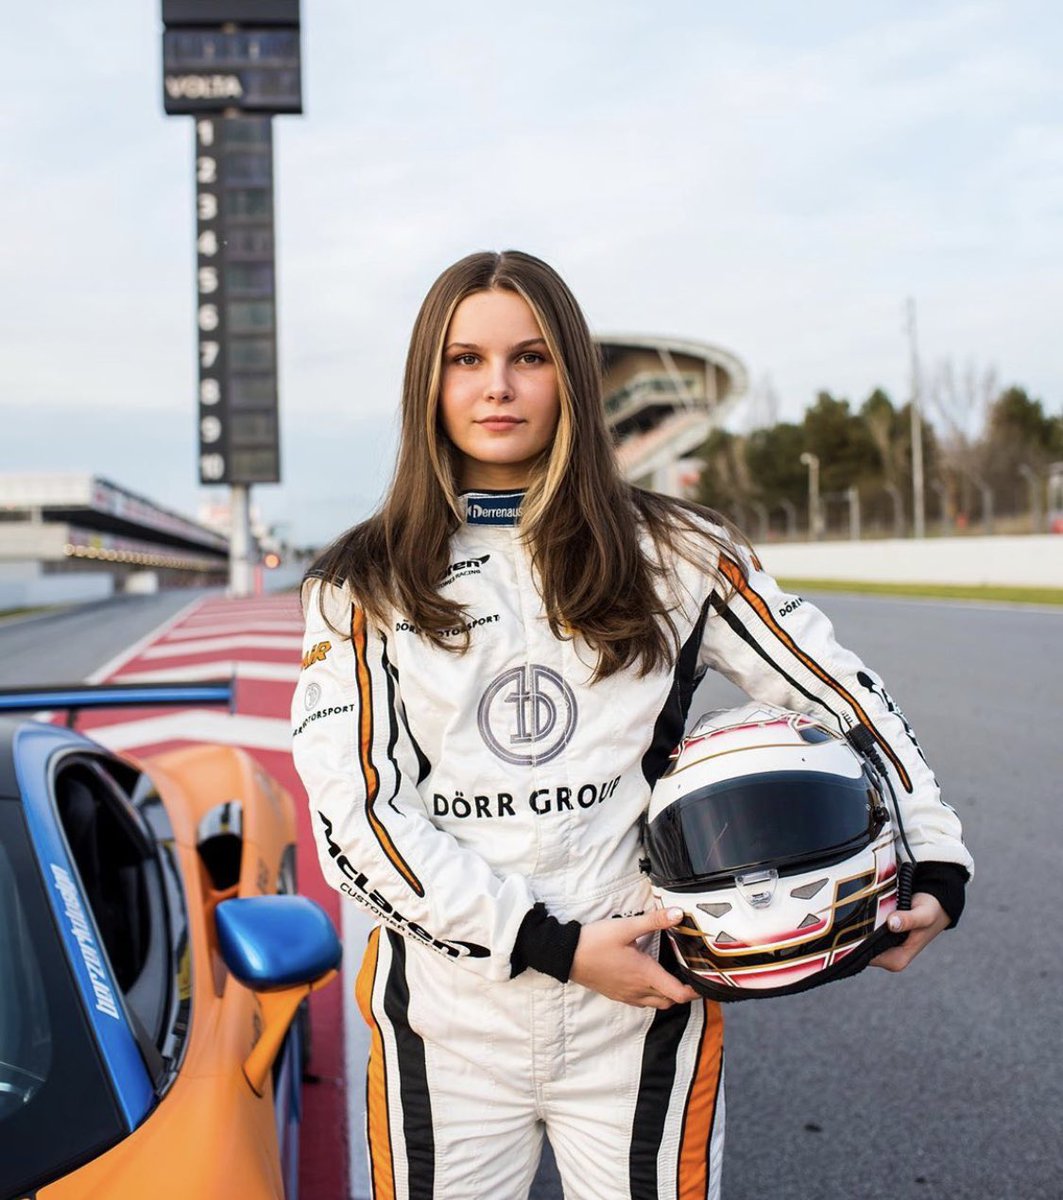 Patricija Stalidzane At just 18 years of age Patricija has one ADAC GT4 season under her belt, making the switch from Audi to McLaren this season after one podium in 2019.Patricija will aim to be a frontrunner by the end of the season in silver cup.  Patricijastalidzane